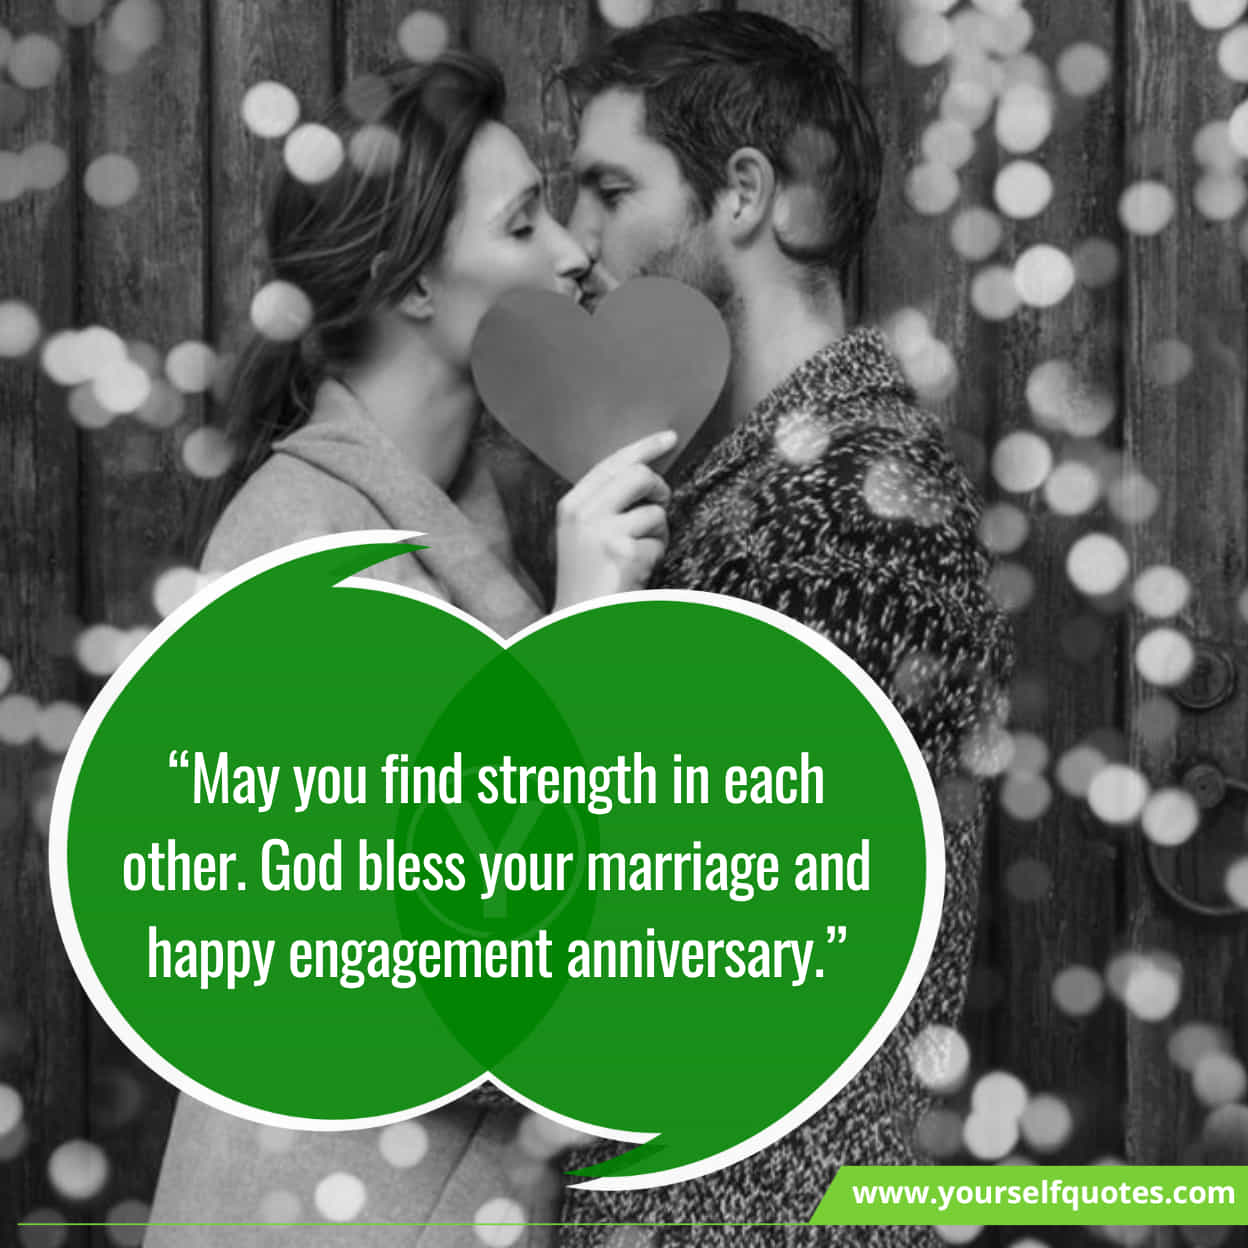 50+ Engagement Anniversary Wishes, Messages and Quotes with Images